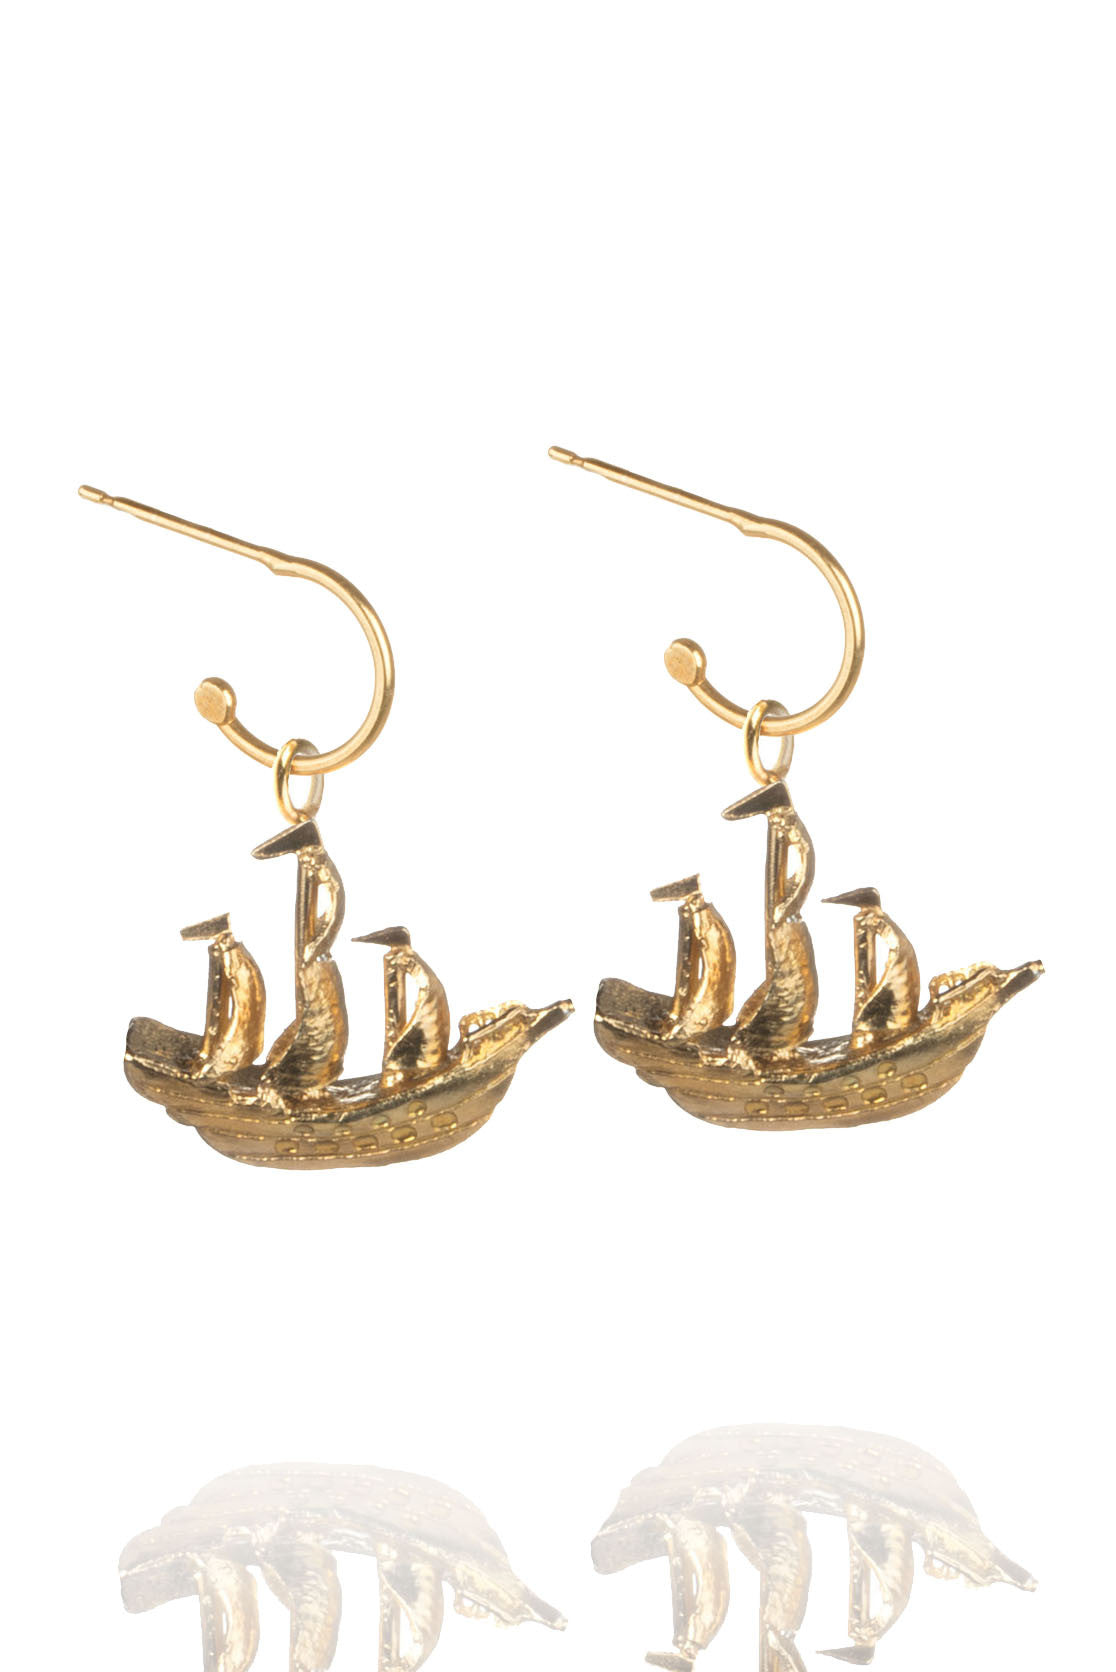 Sea ship earrings made from gold plate